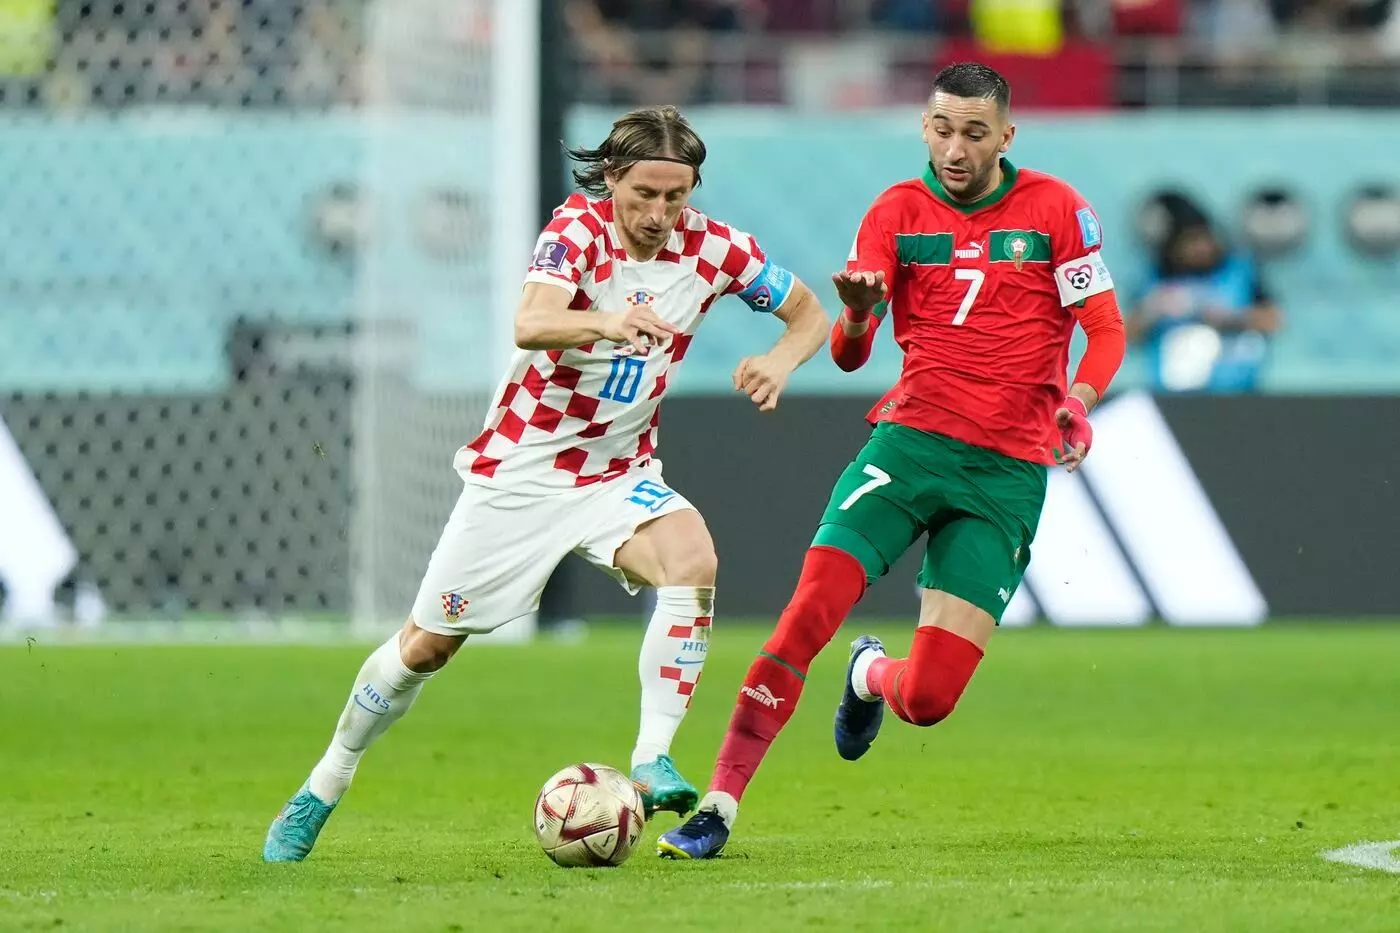 FIFA World Cup: Croatia defeated Morocco 2-1 to take third place